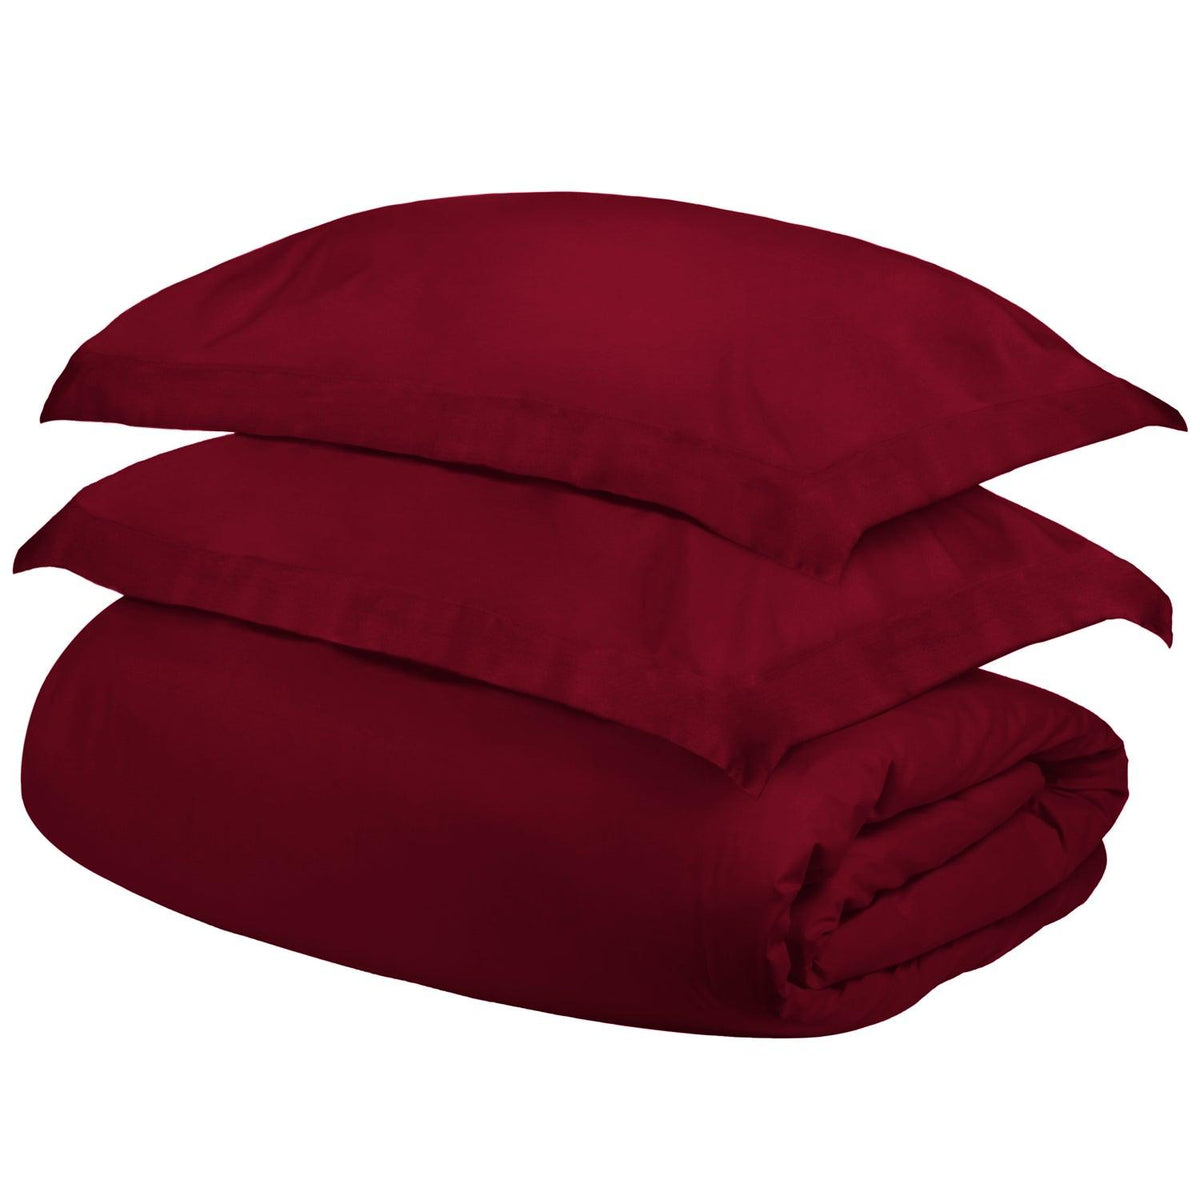  Superior Egyptian Cotton 400 Thread Count Solid Duvet Cover Set -  Burgundy